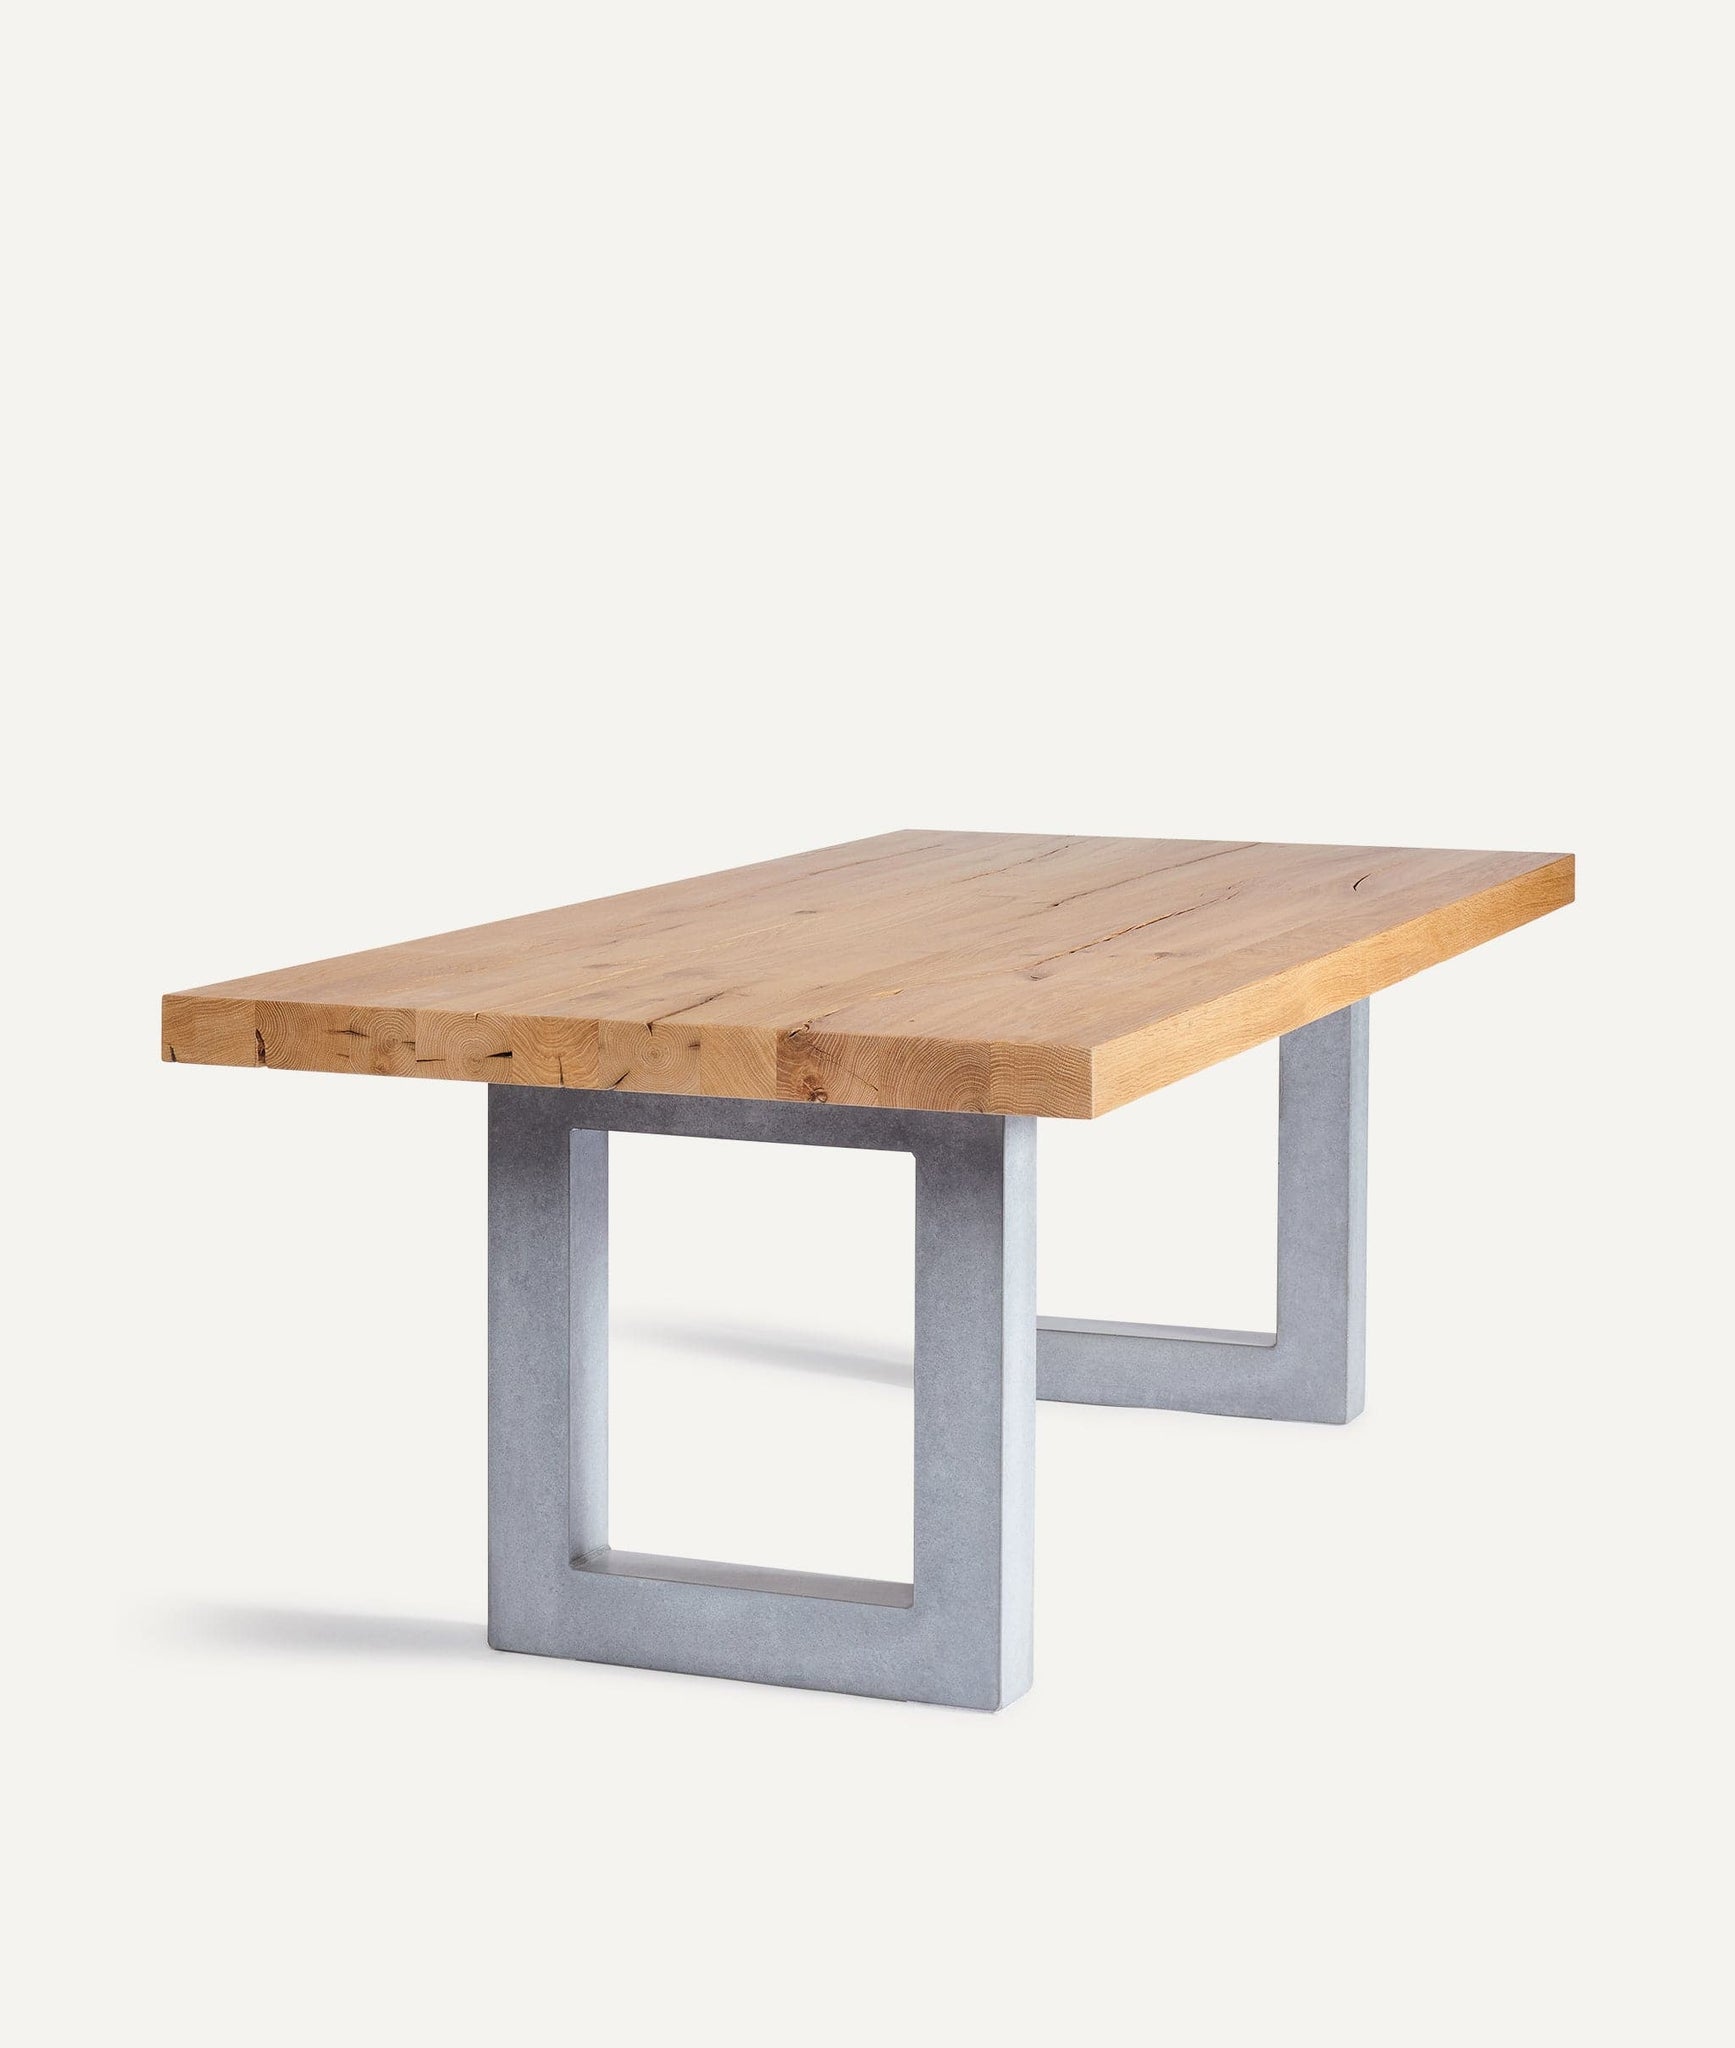 Solid Wood Table in Historic Oak with Concrete Frame